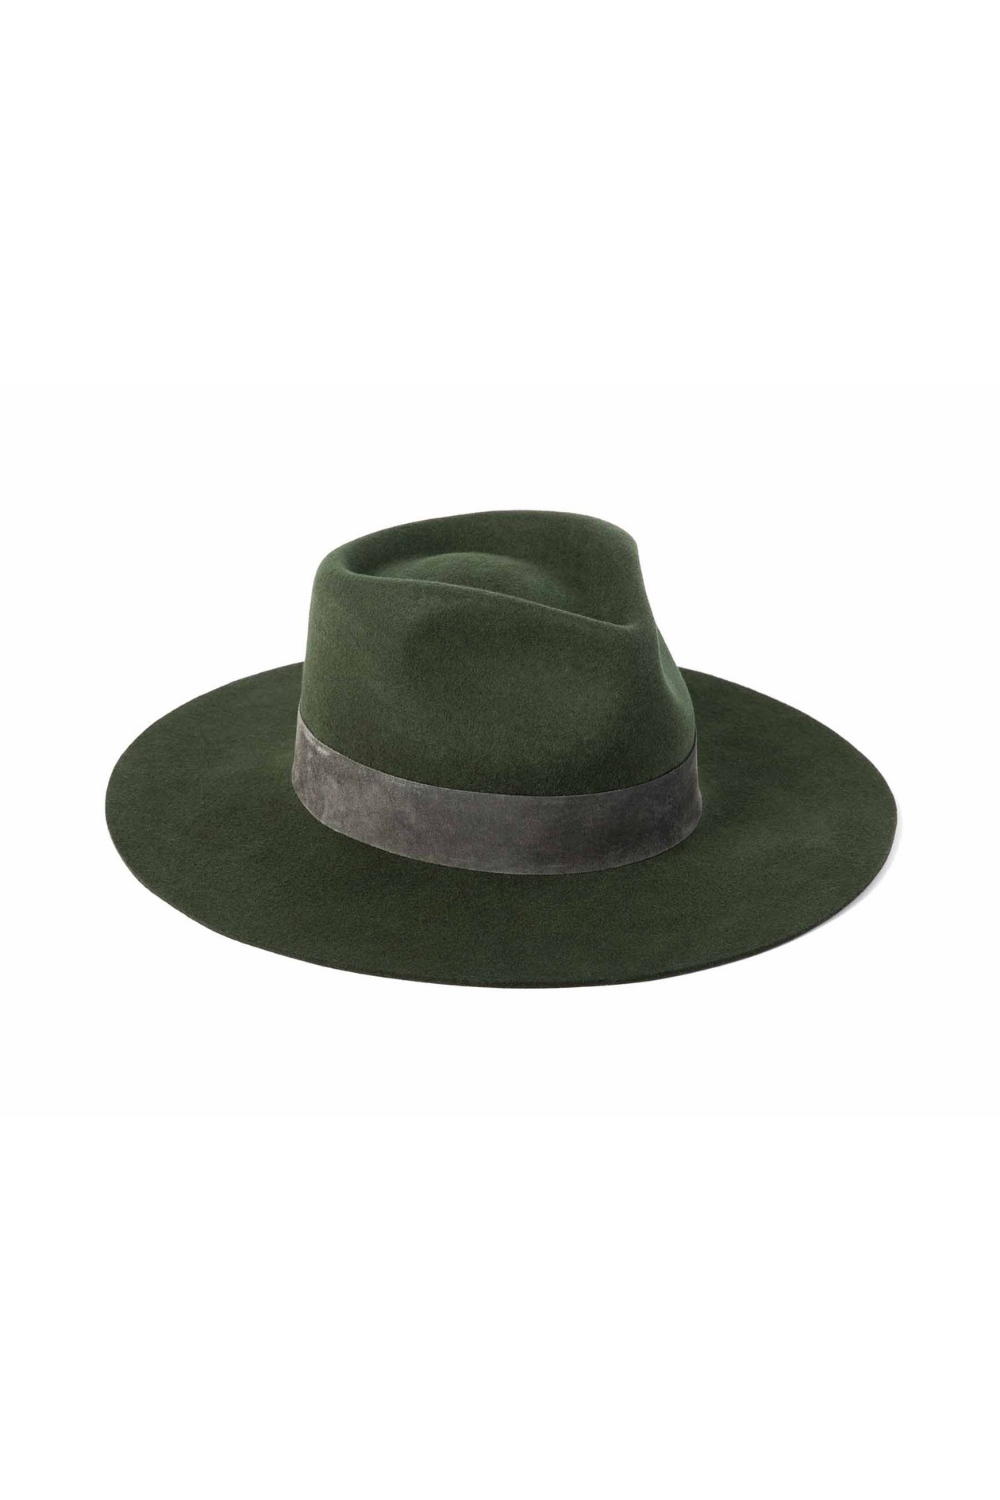 THE MIRAGE FOREST HAT